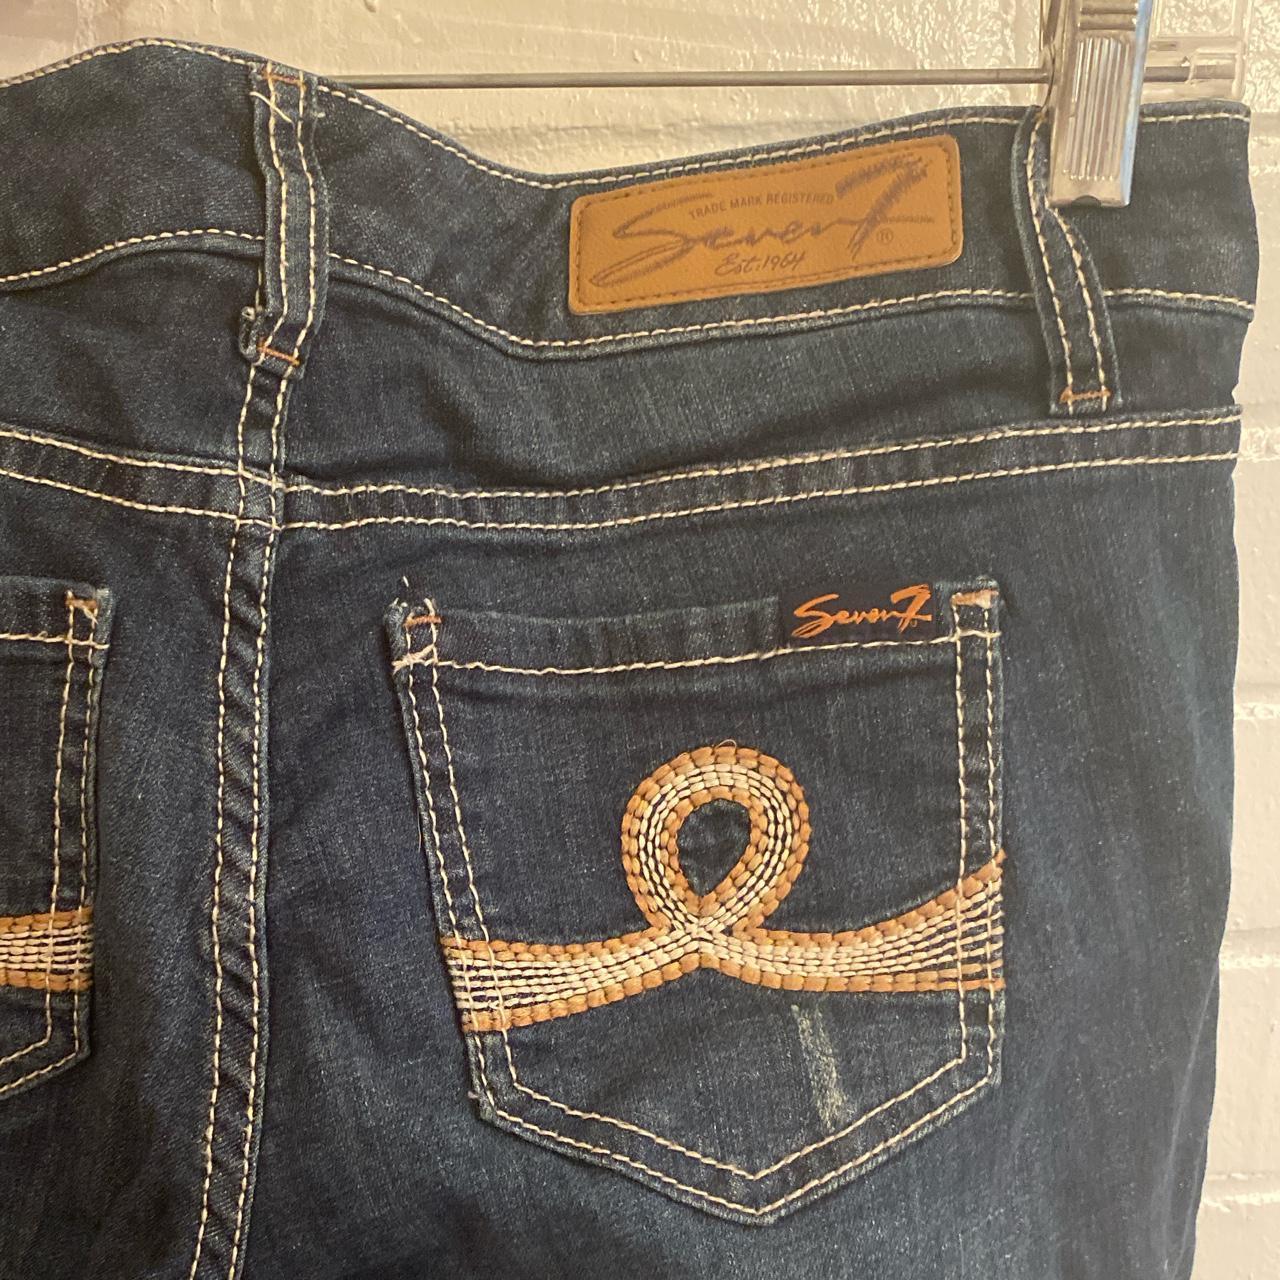 Product Image 3 - Seven7 jeans. Size 4 

Message